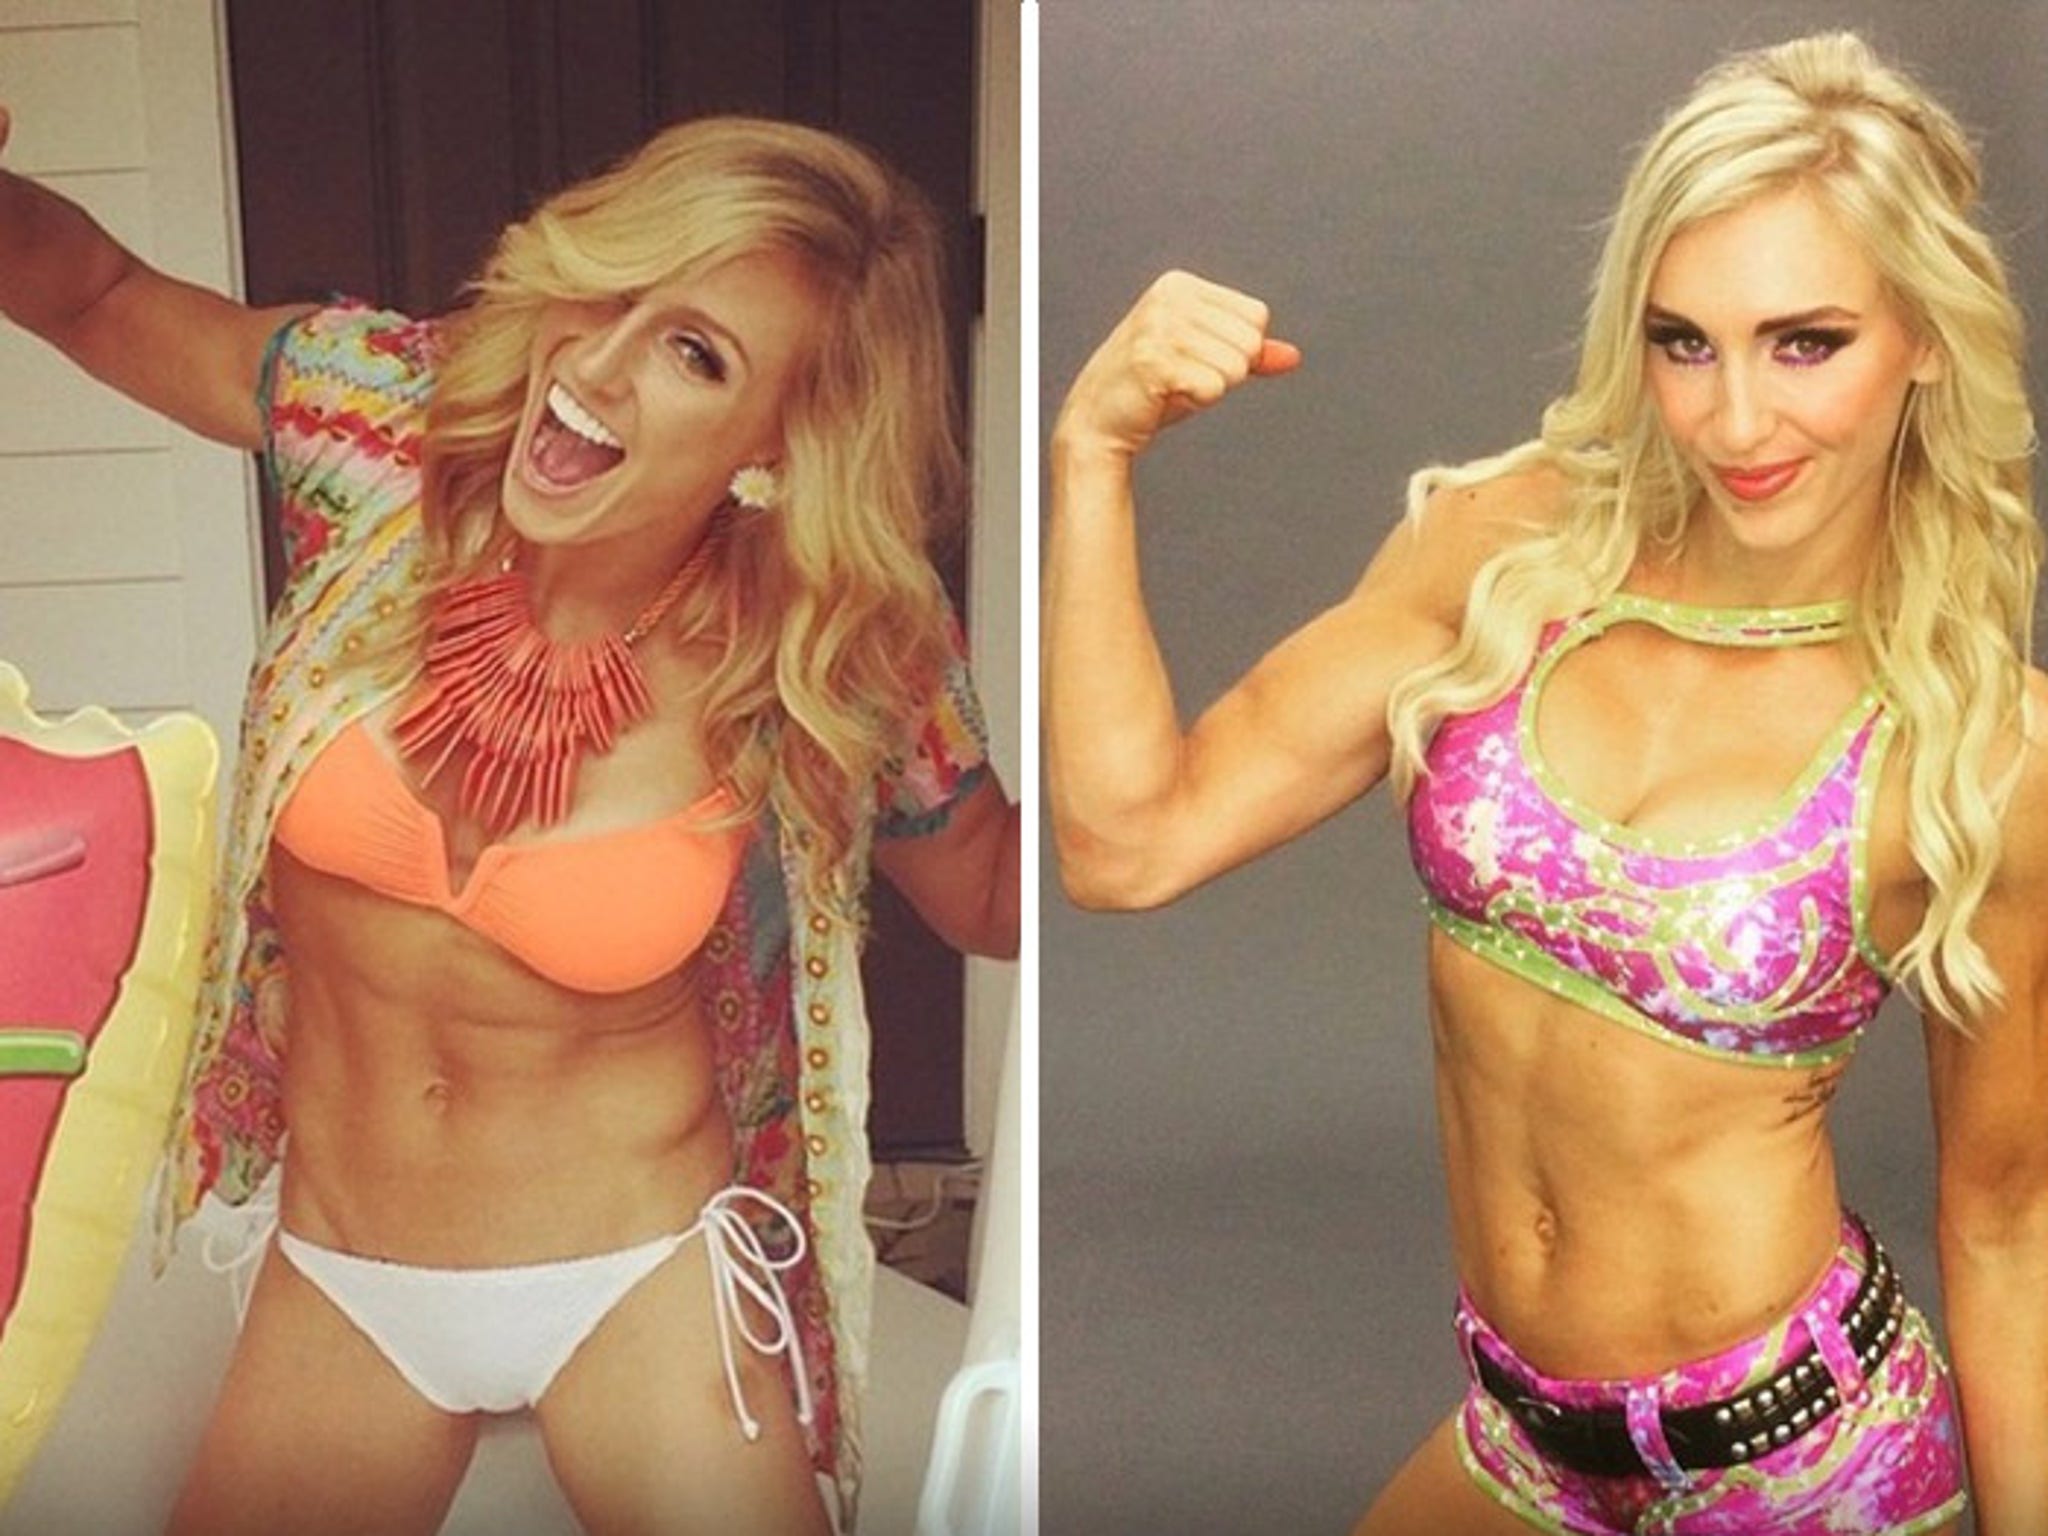 Best of Charlotte flair hot pictures